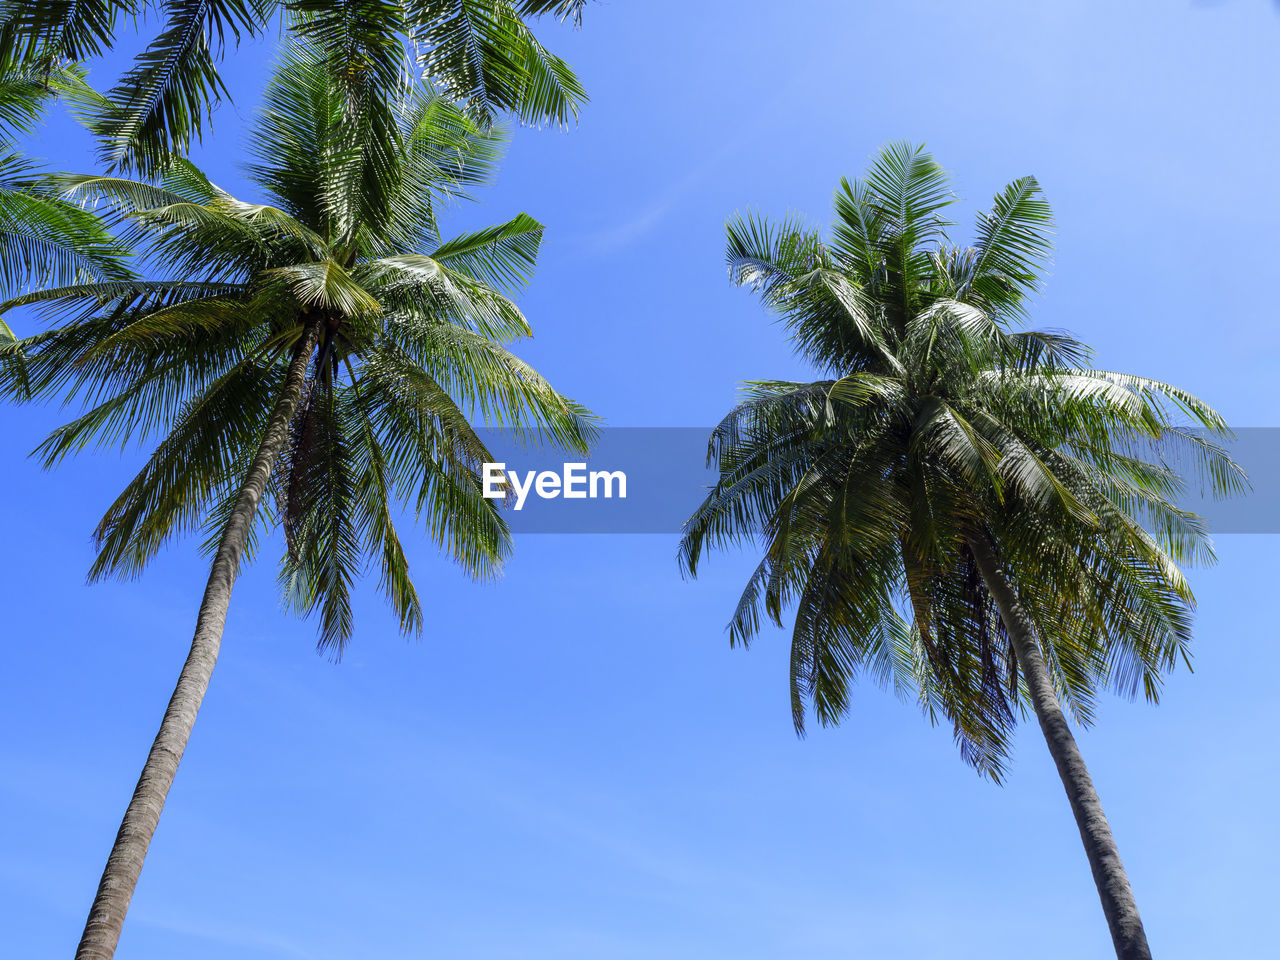 palm tree, tree, tropical climate, sky, plant, nature, blue, low angle view, tropical tree, borassus flabellifer, coconut palm tree, leaf, beauty in nature, no people, growth, outdoors, branch, clear sky, tree trunk, trunk, tranquility, day, palm leaf, flower, sunny, tropics, cloud, scenics - nature, travel destinations, travel, land, directly below, sunlight, environment, green, date palm tree, idyllic, wind